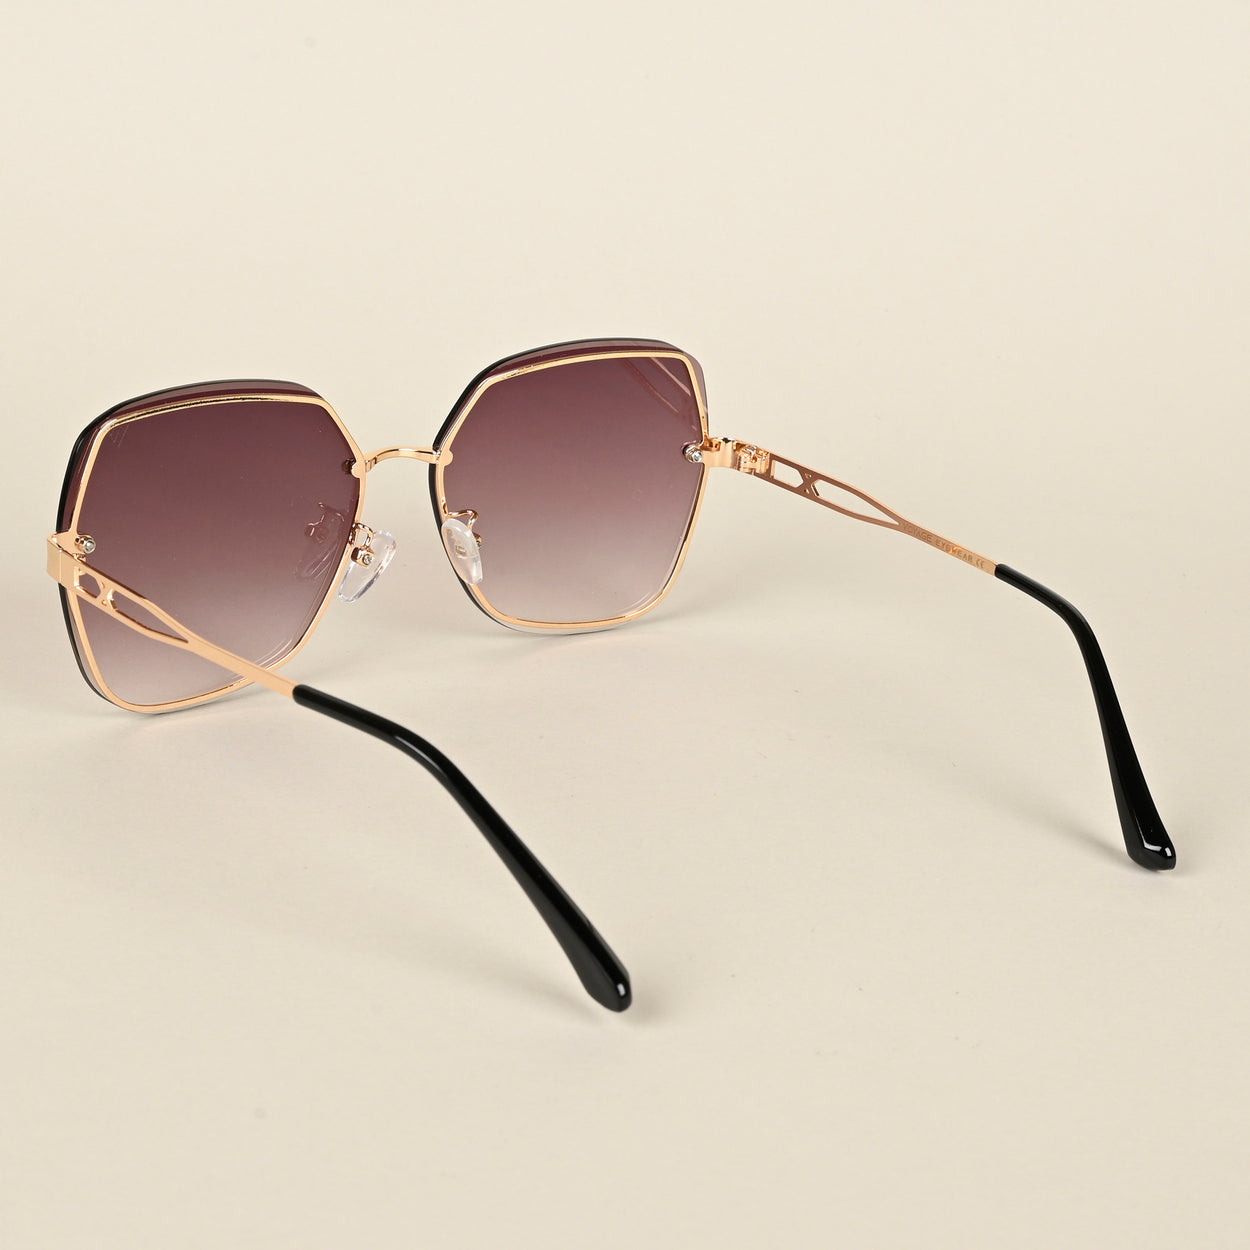 Voyage Brown Oversize Sunglasses for Women - MG4318